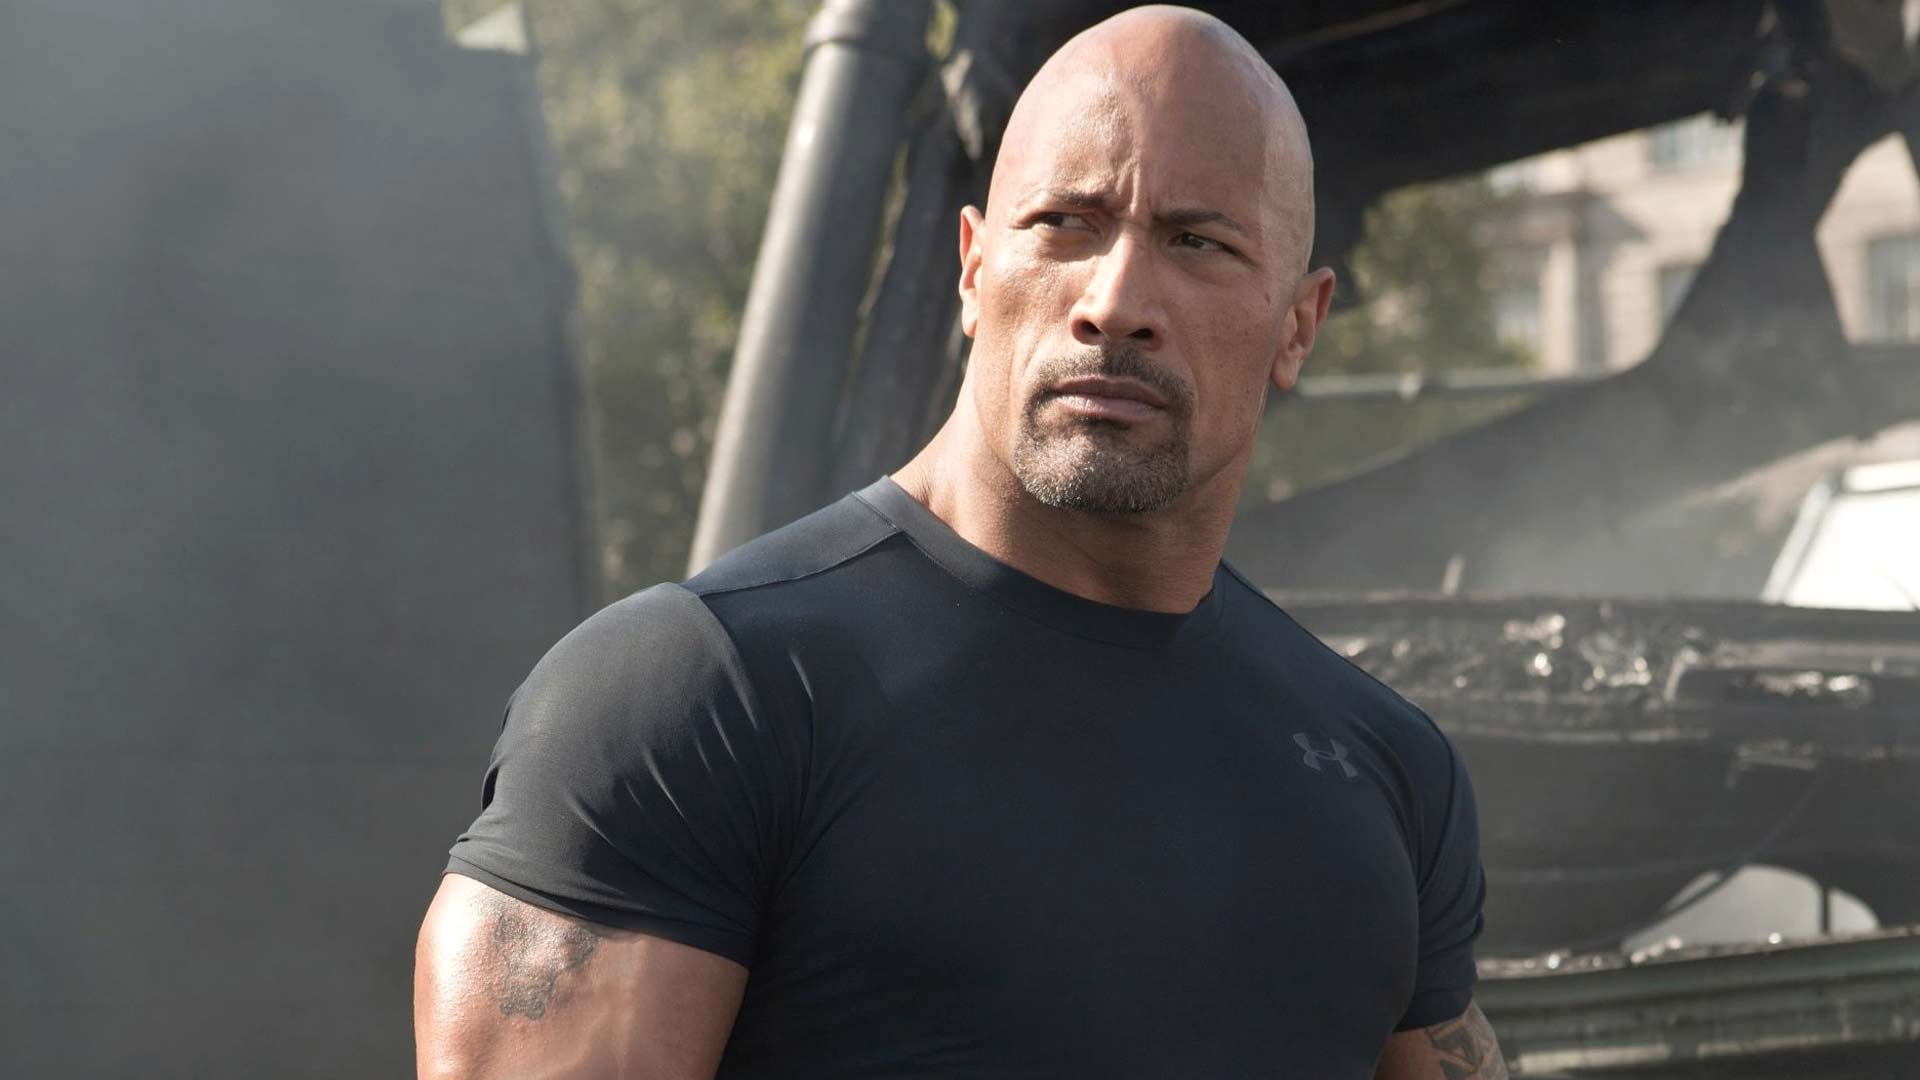 San andreas the rock wallpapers – Free full hd wallpapers for ...